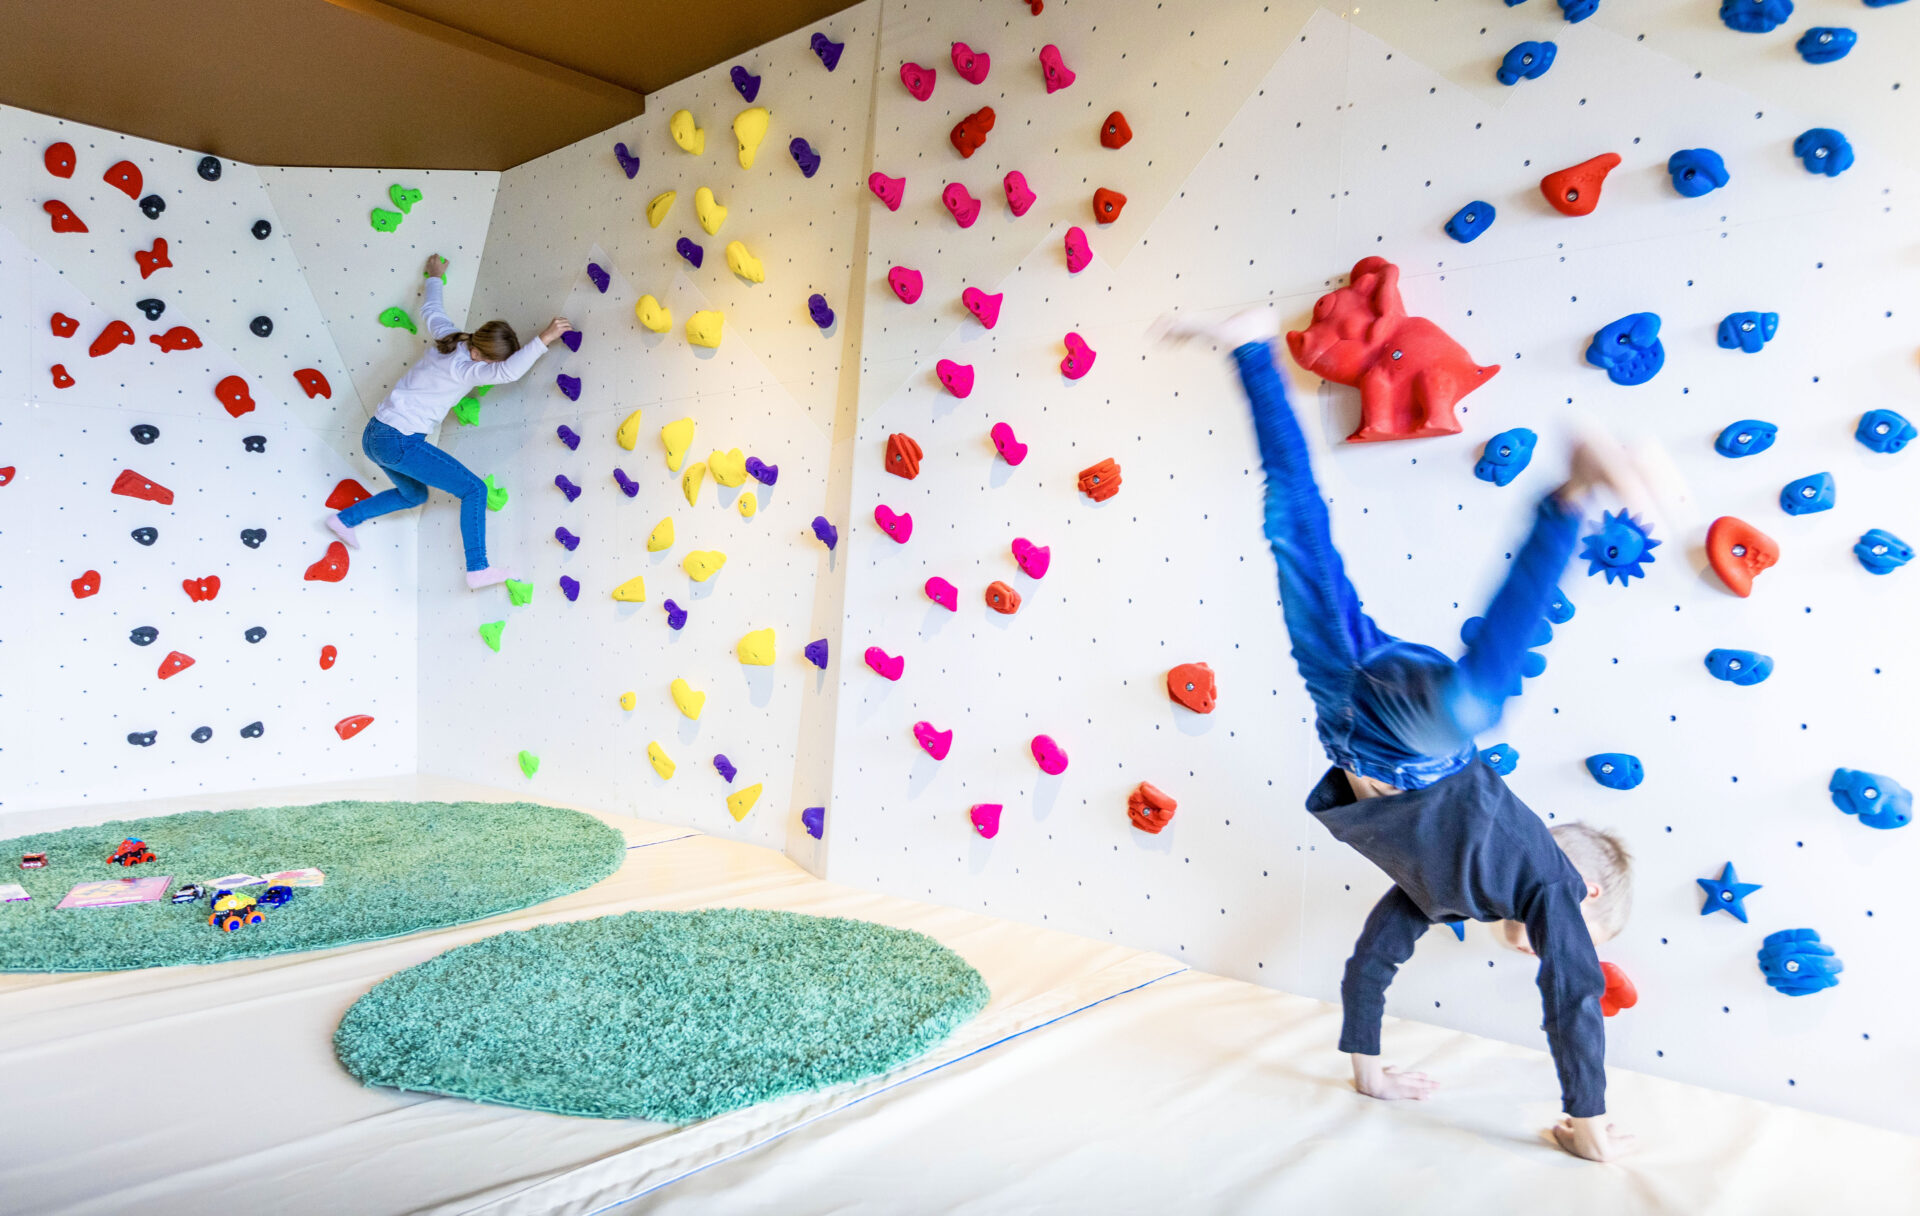 An image of the climbing wall at the kids club